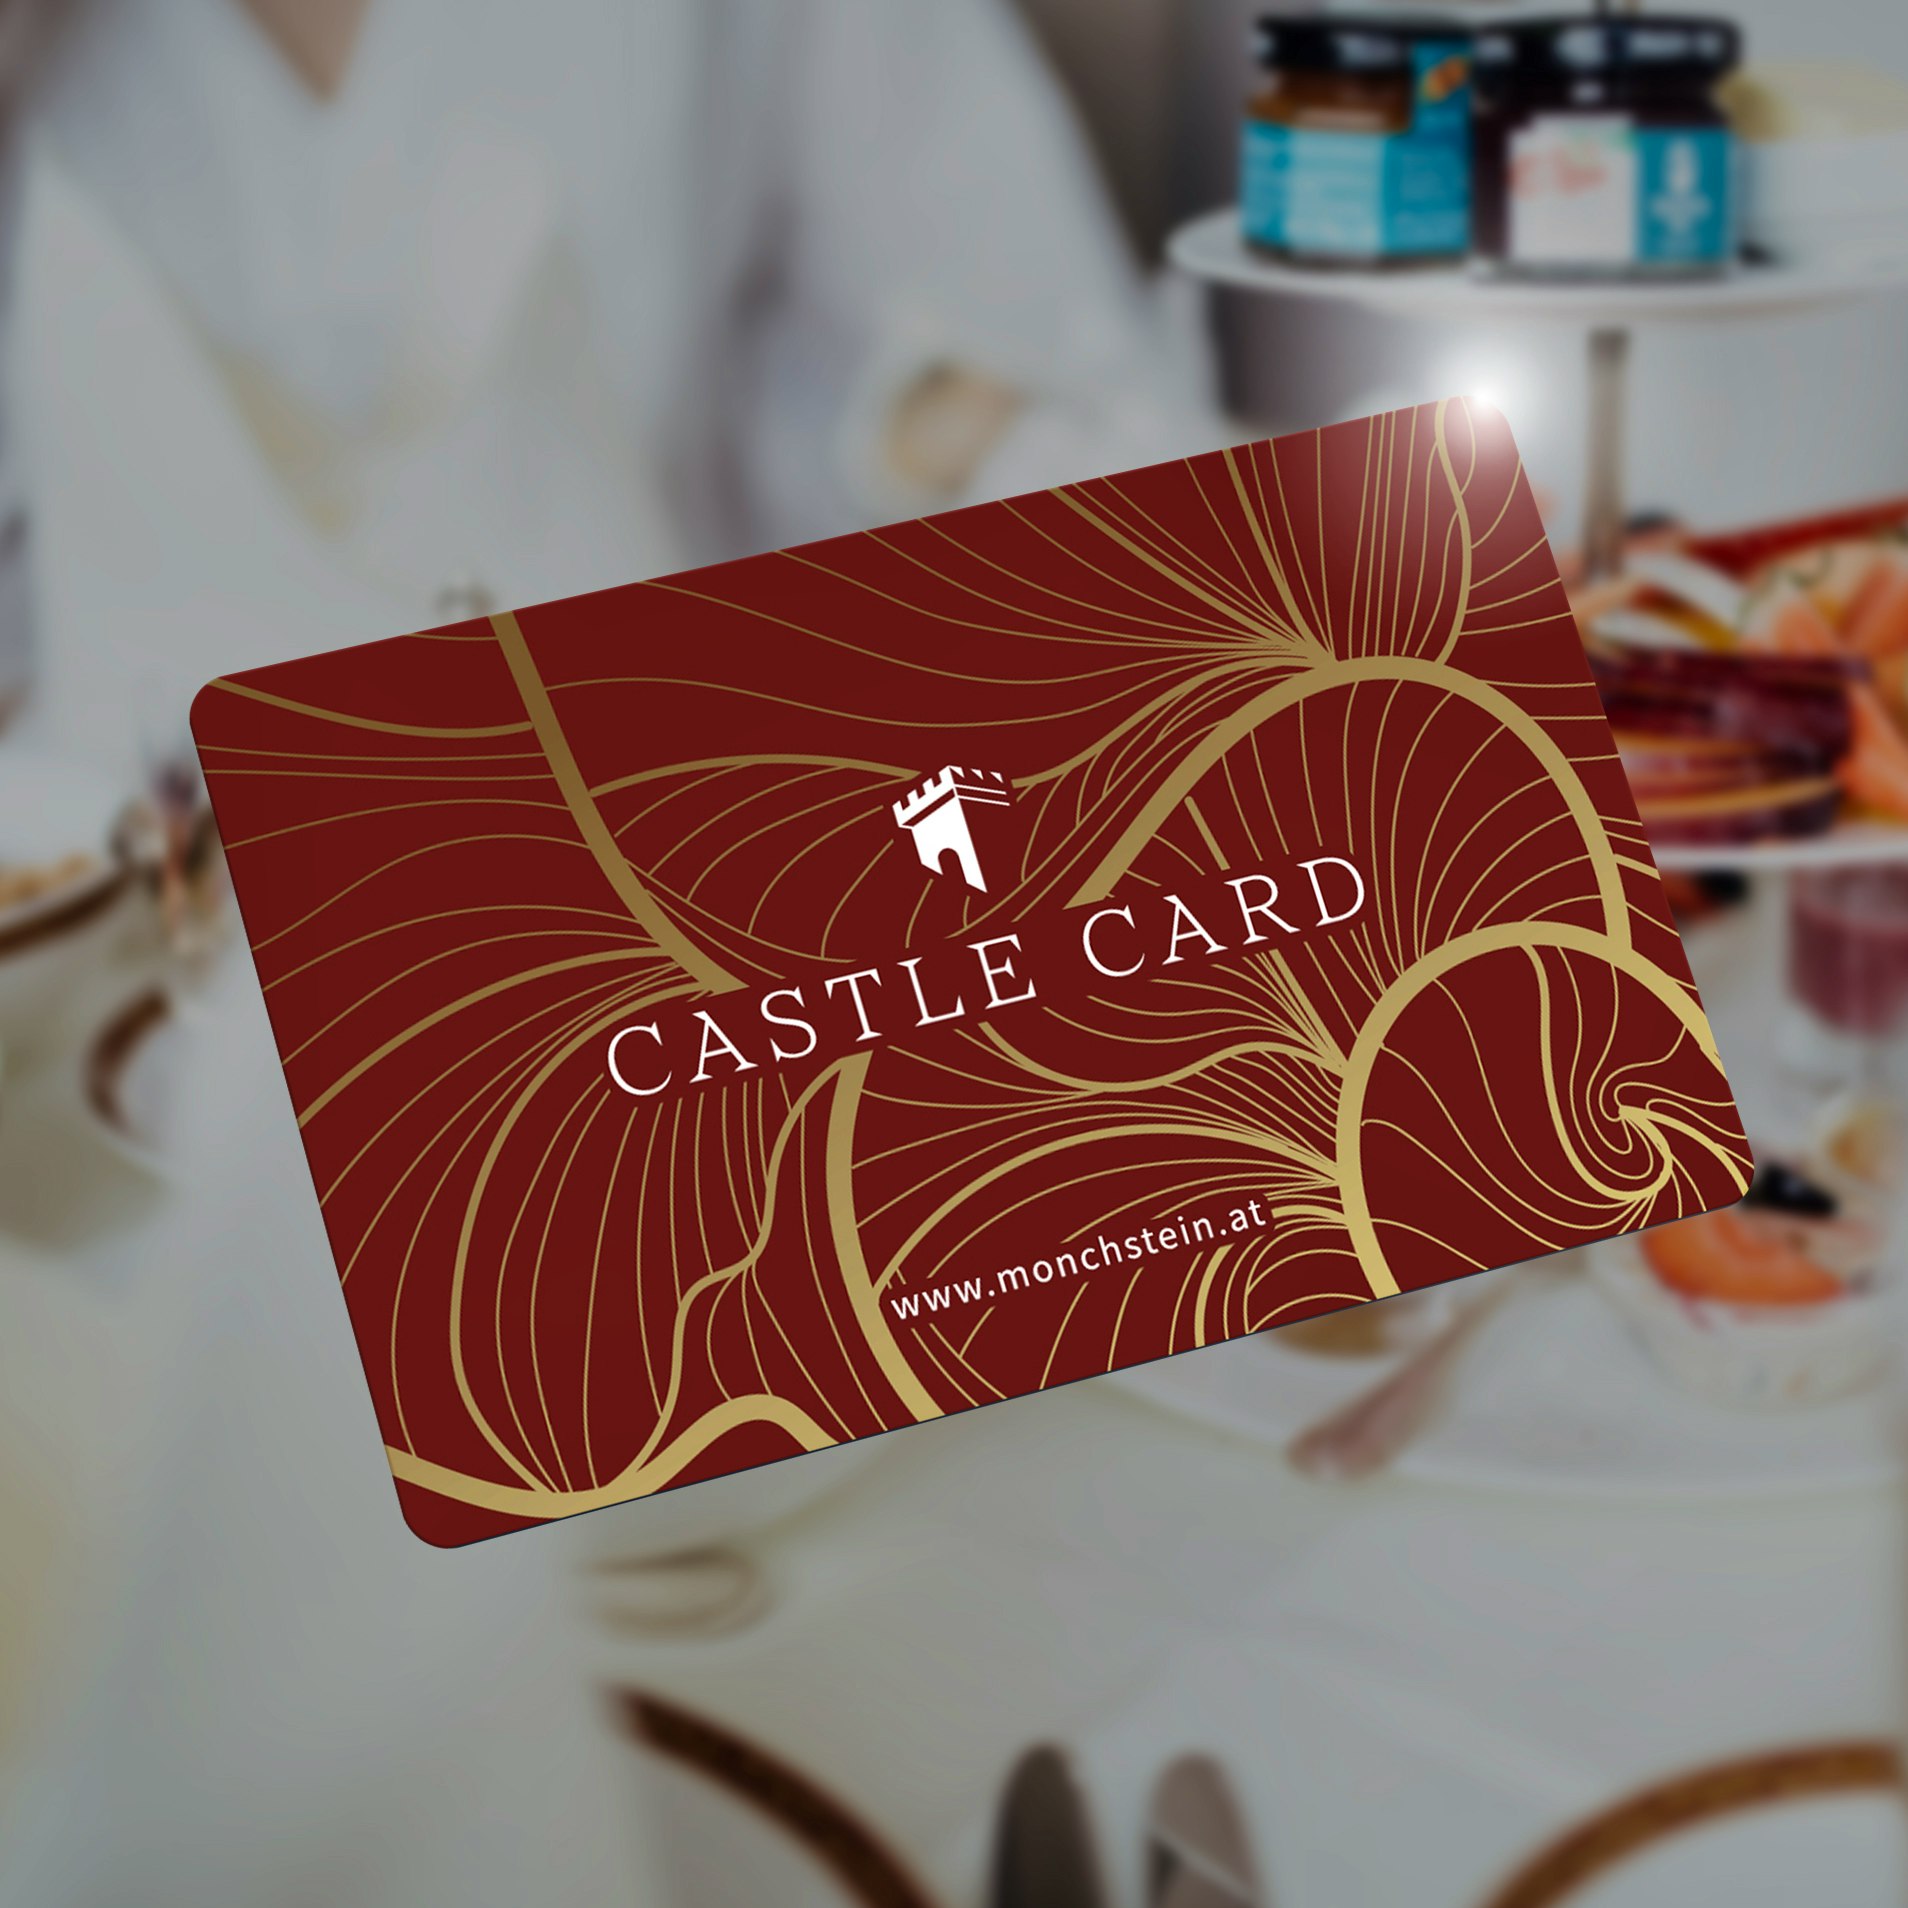 Castle Card Red